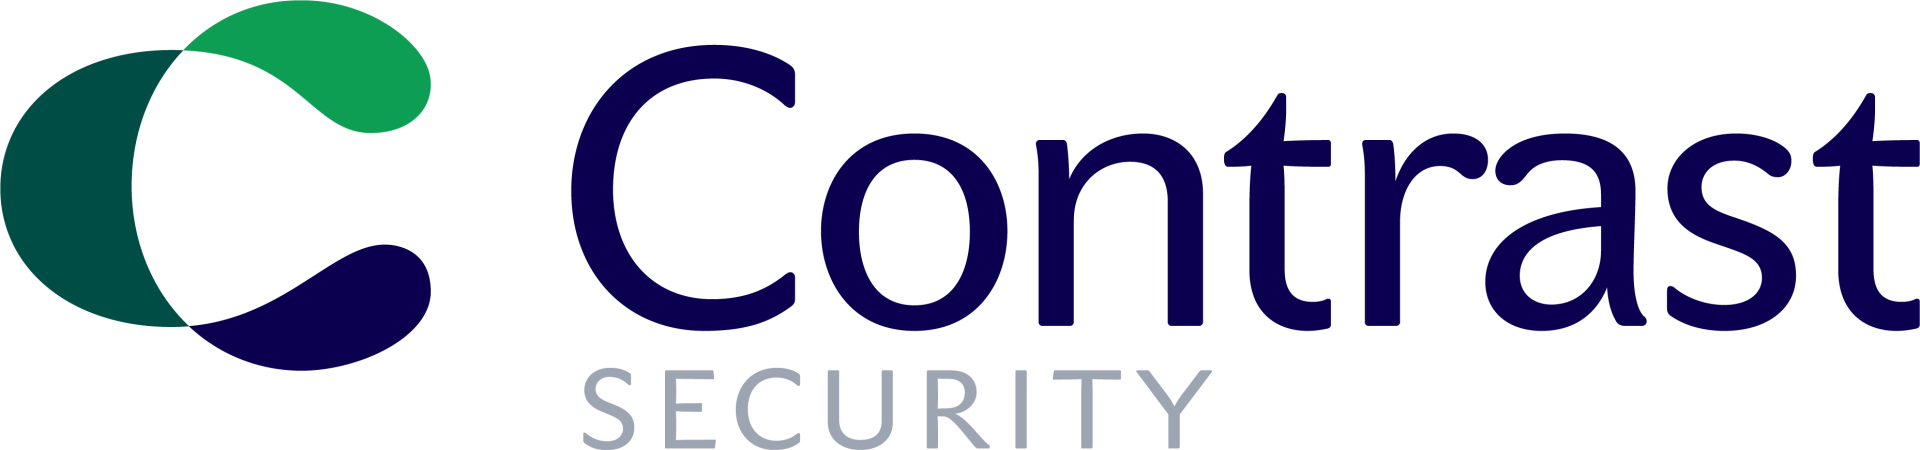 ContrastSecurity